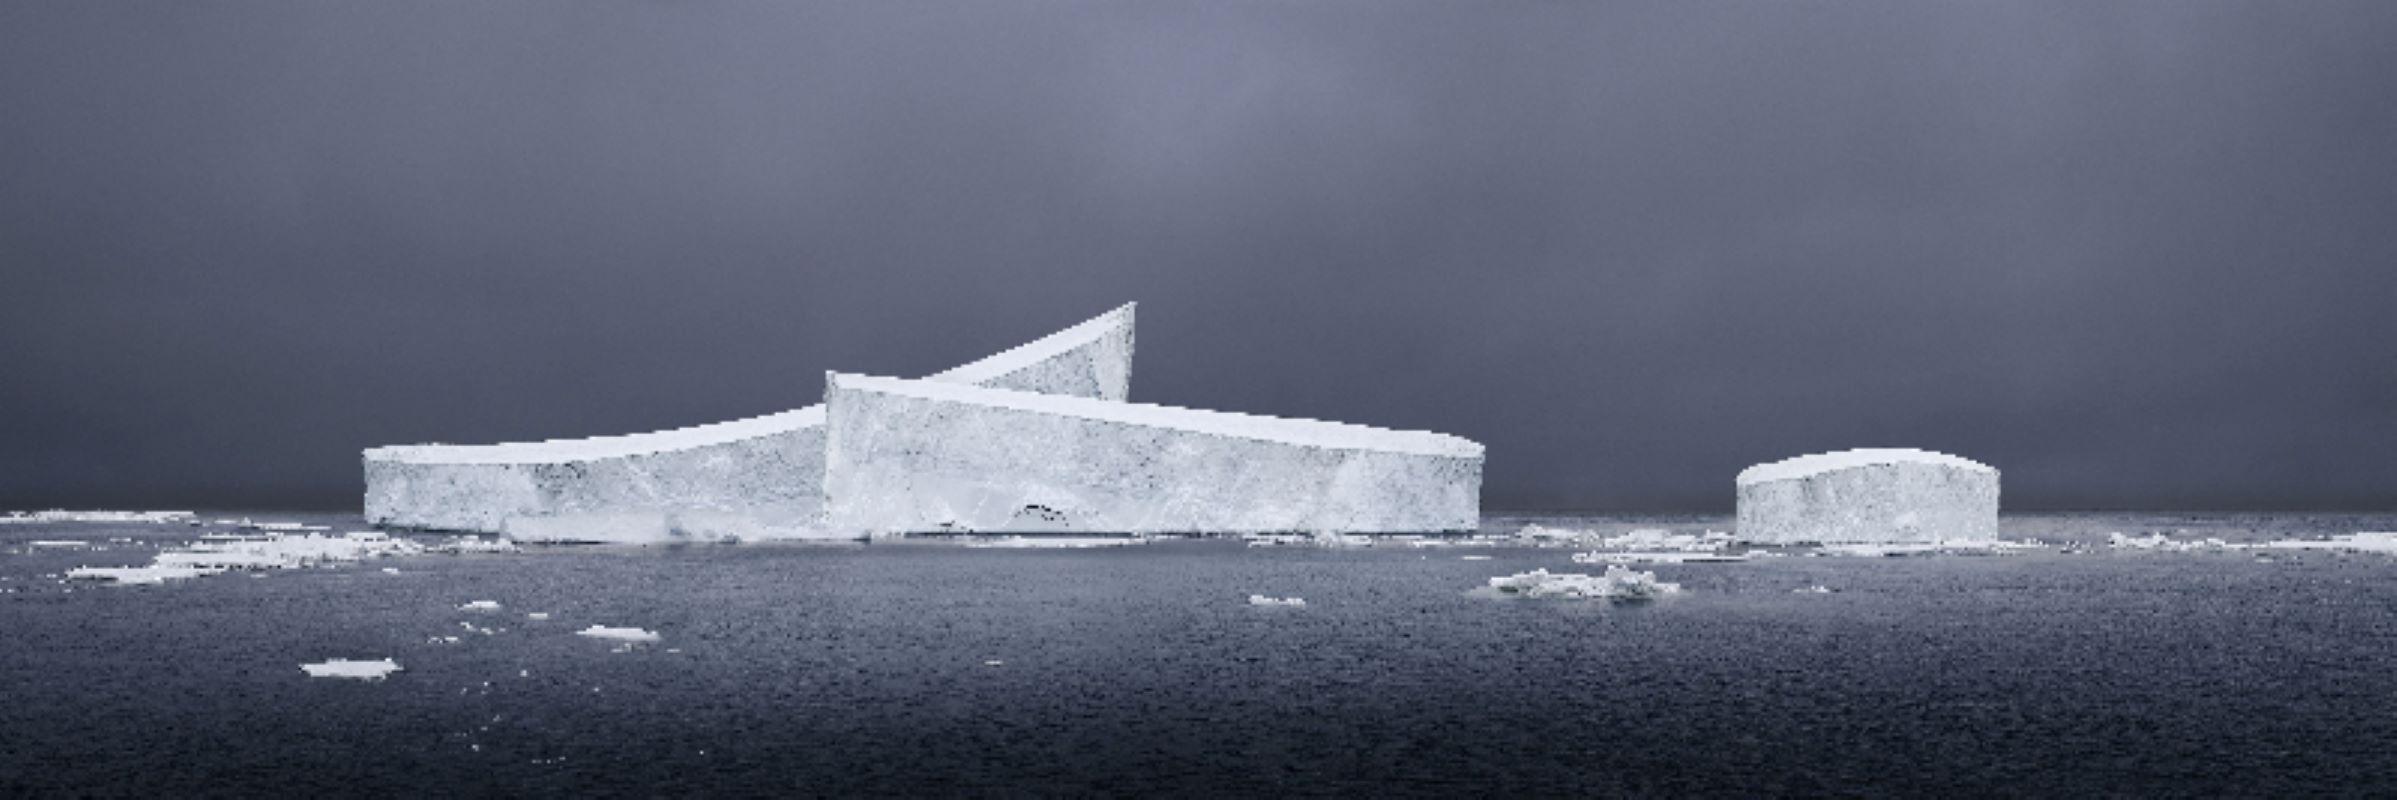 David Burdeny (b. 1968. Winnipeg, Canada) graduated with a Masters in Architecture and Interior Design and spent the early part of his career practicing in his field before establishing himself as a photographer. Burdeny translates his intimate